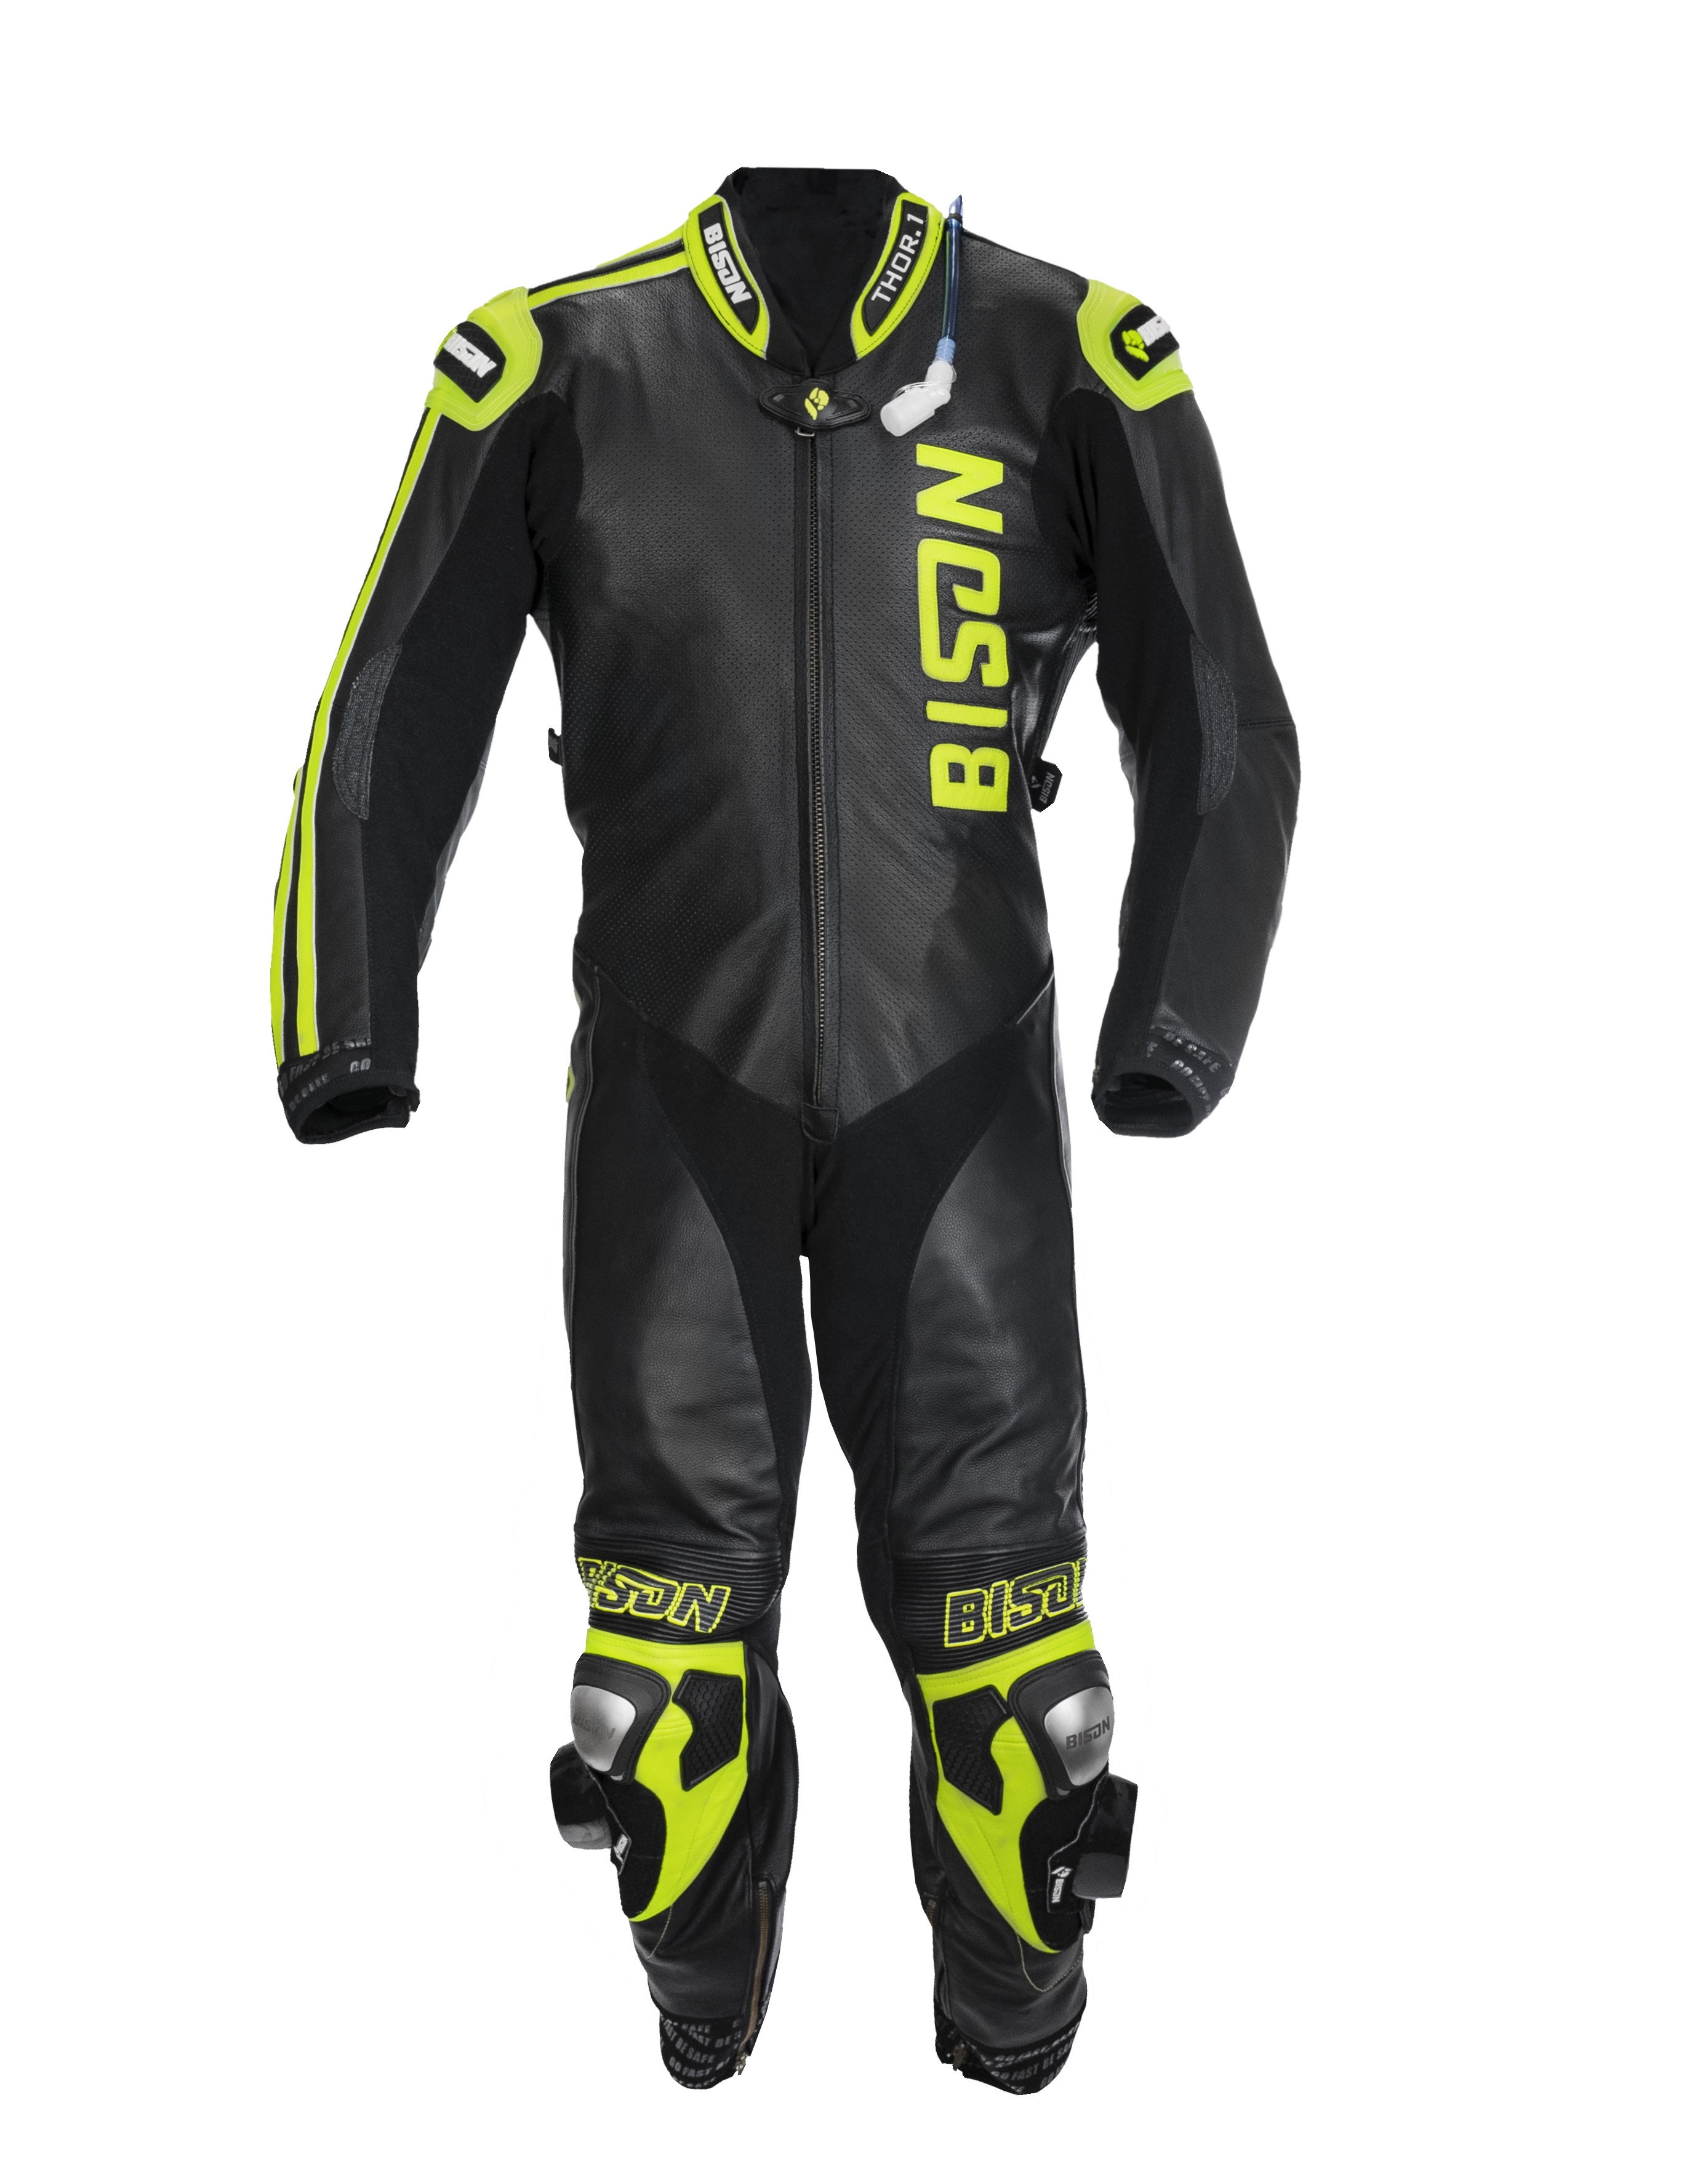 Bison Bright Future Colorway Motorcycle Racing Suits